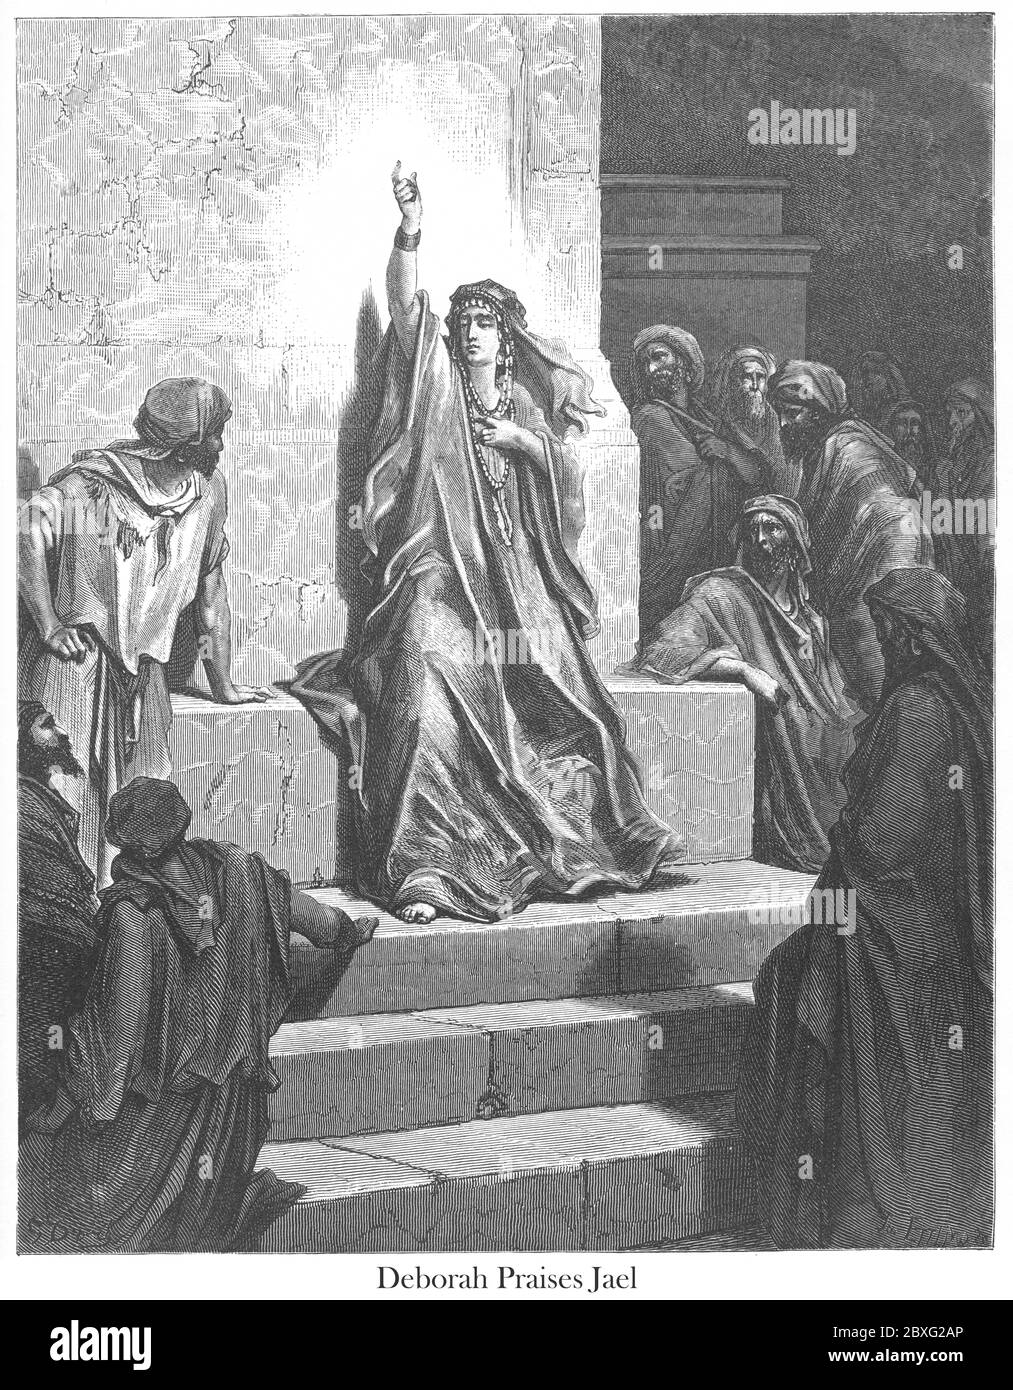 Deborah praises Jael [Judges 5:7-9] From the book 'Bible Gallery' Illustrated by Gustave Dore with Memoir of Dore and Descriptive Letter-press by Talbot W. Chambers D.D. Published by Cassell & Company Limited in London and simultaneously by Mame in Tours, France in 1866 Stock Photo